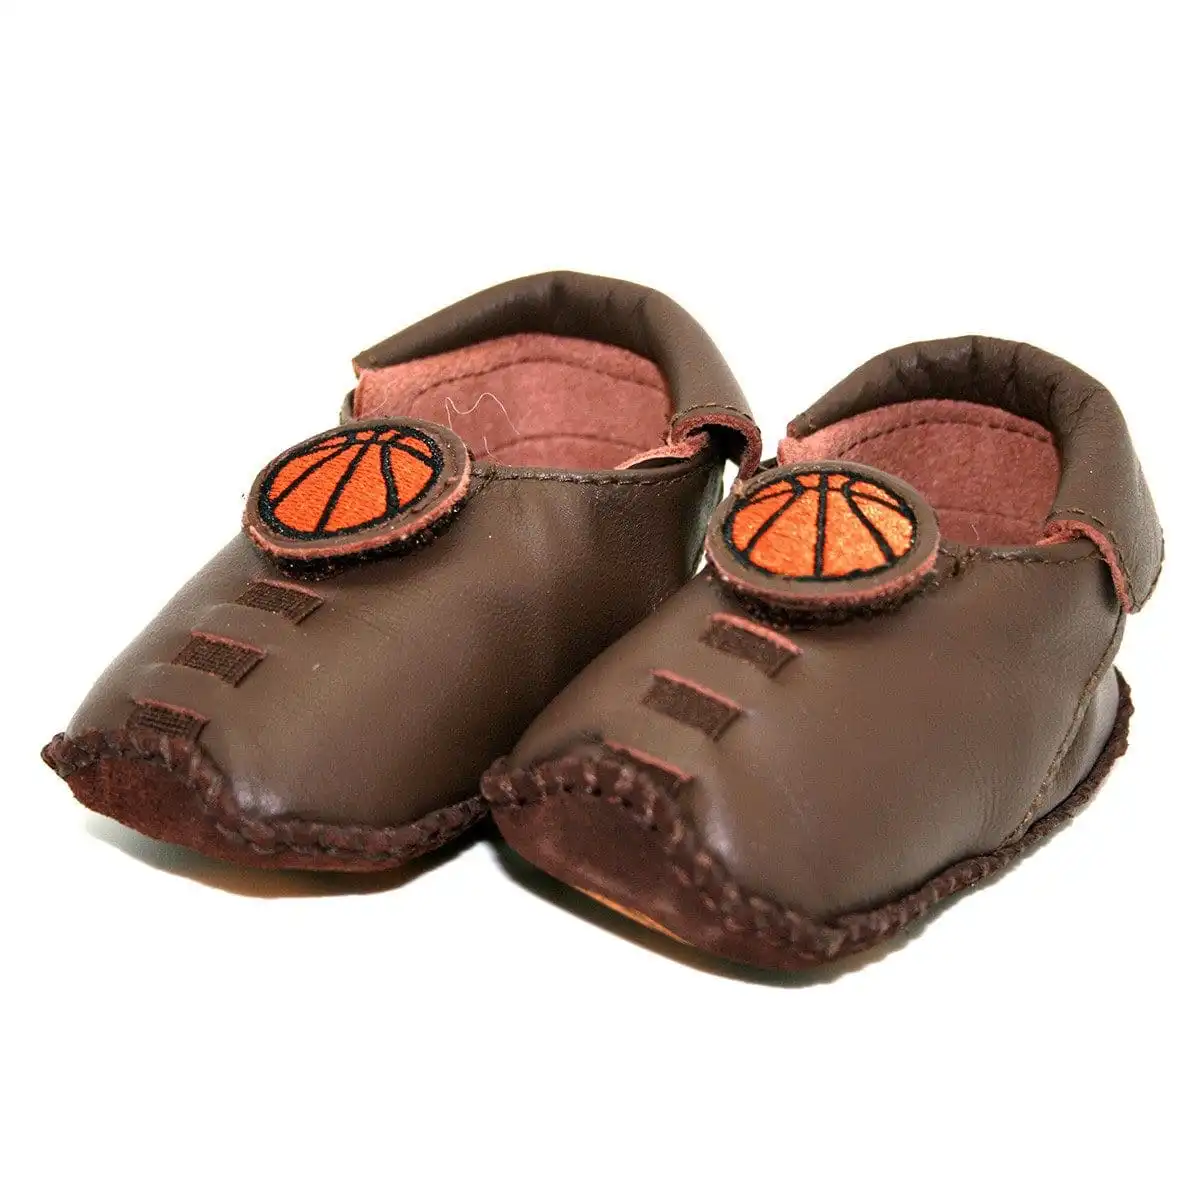 Shupeas Basketball Design - Expandable & Adjustable Soft Sole Baby Shoes